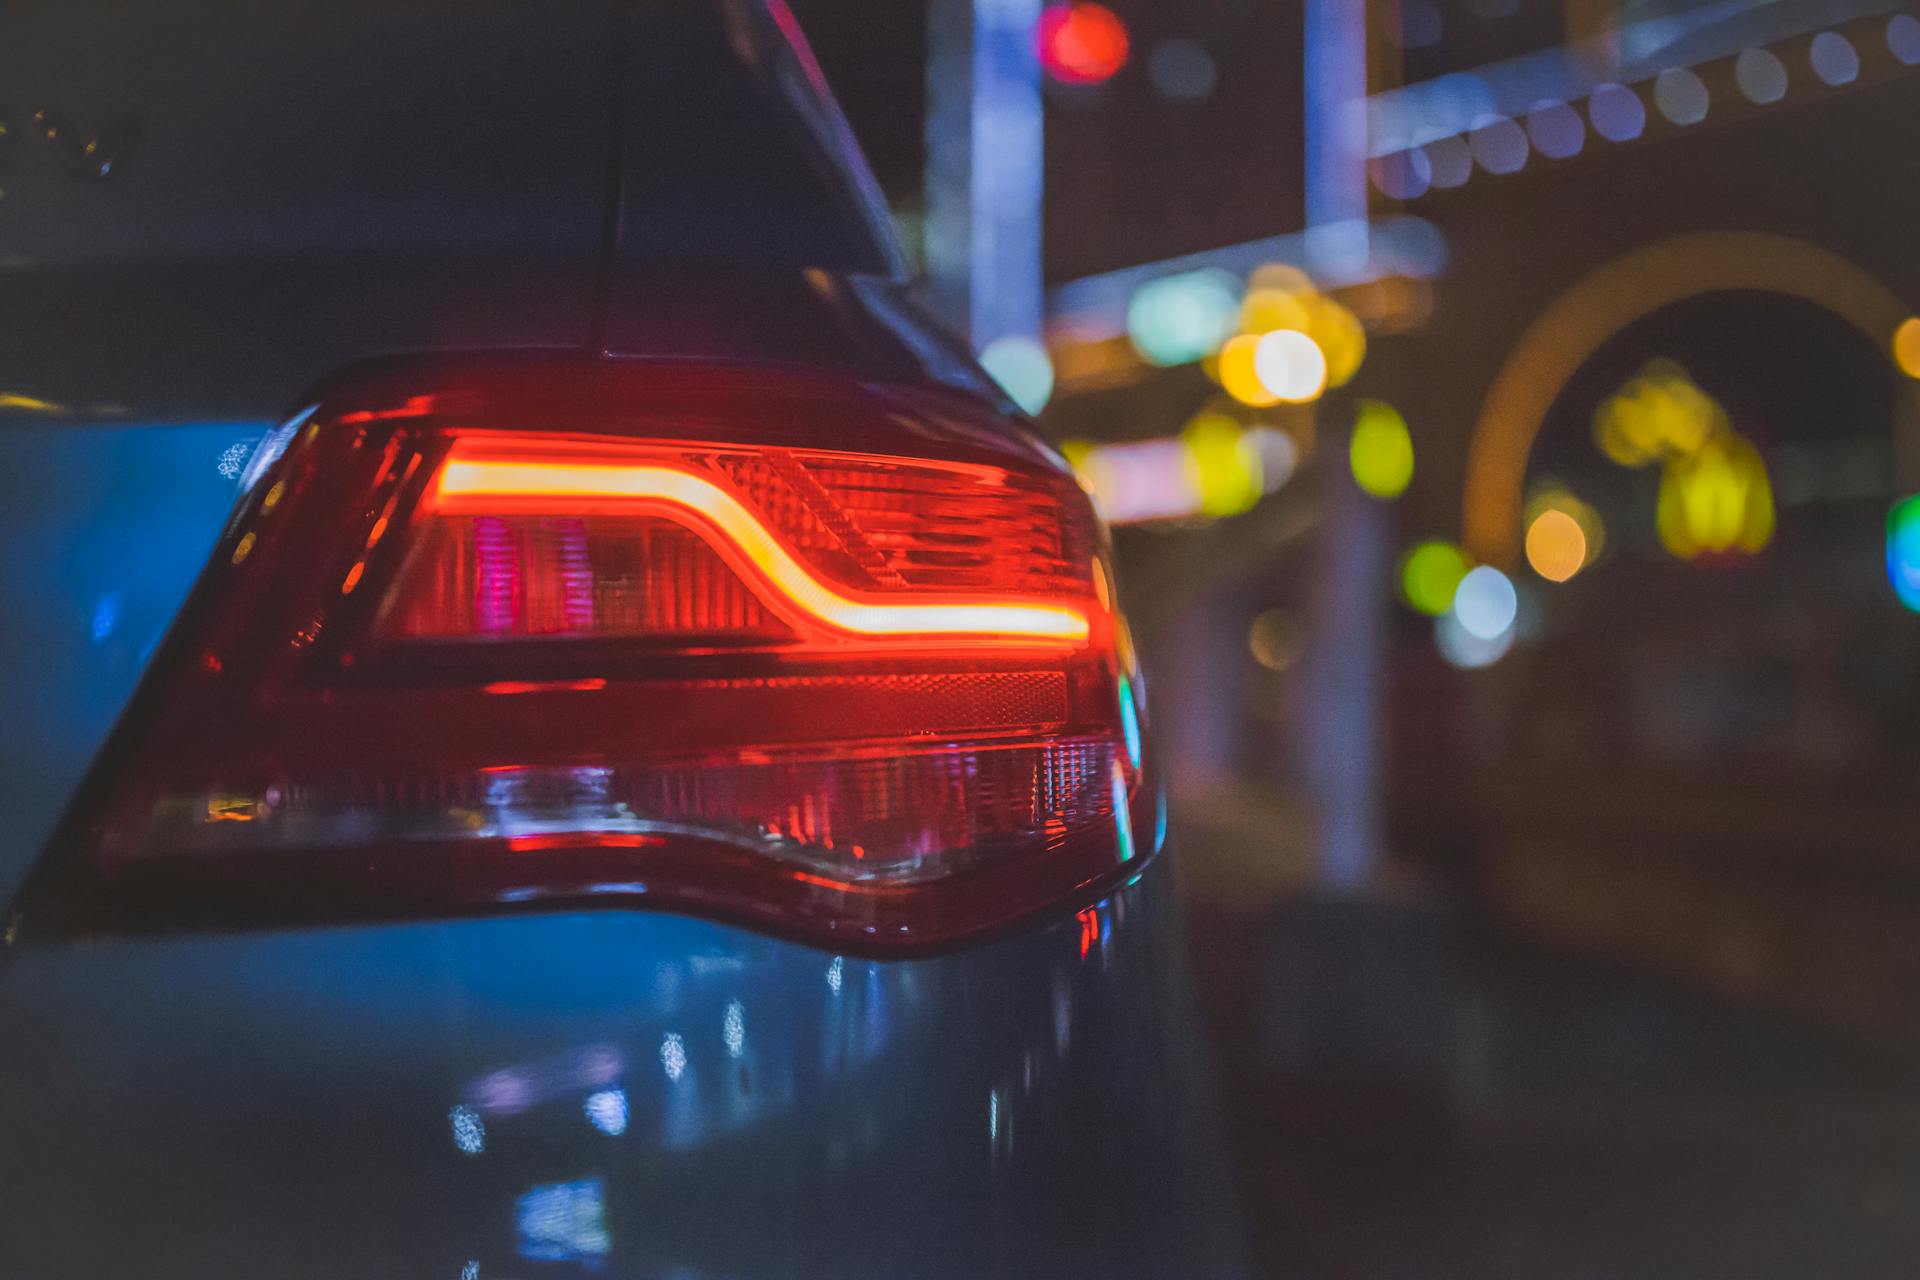 A red taillight | Source: Pexels